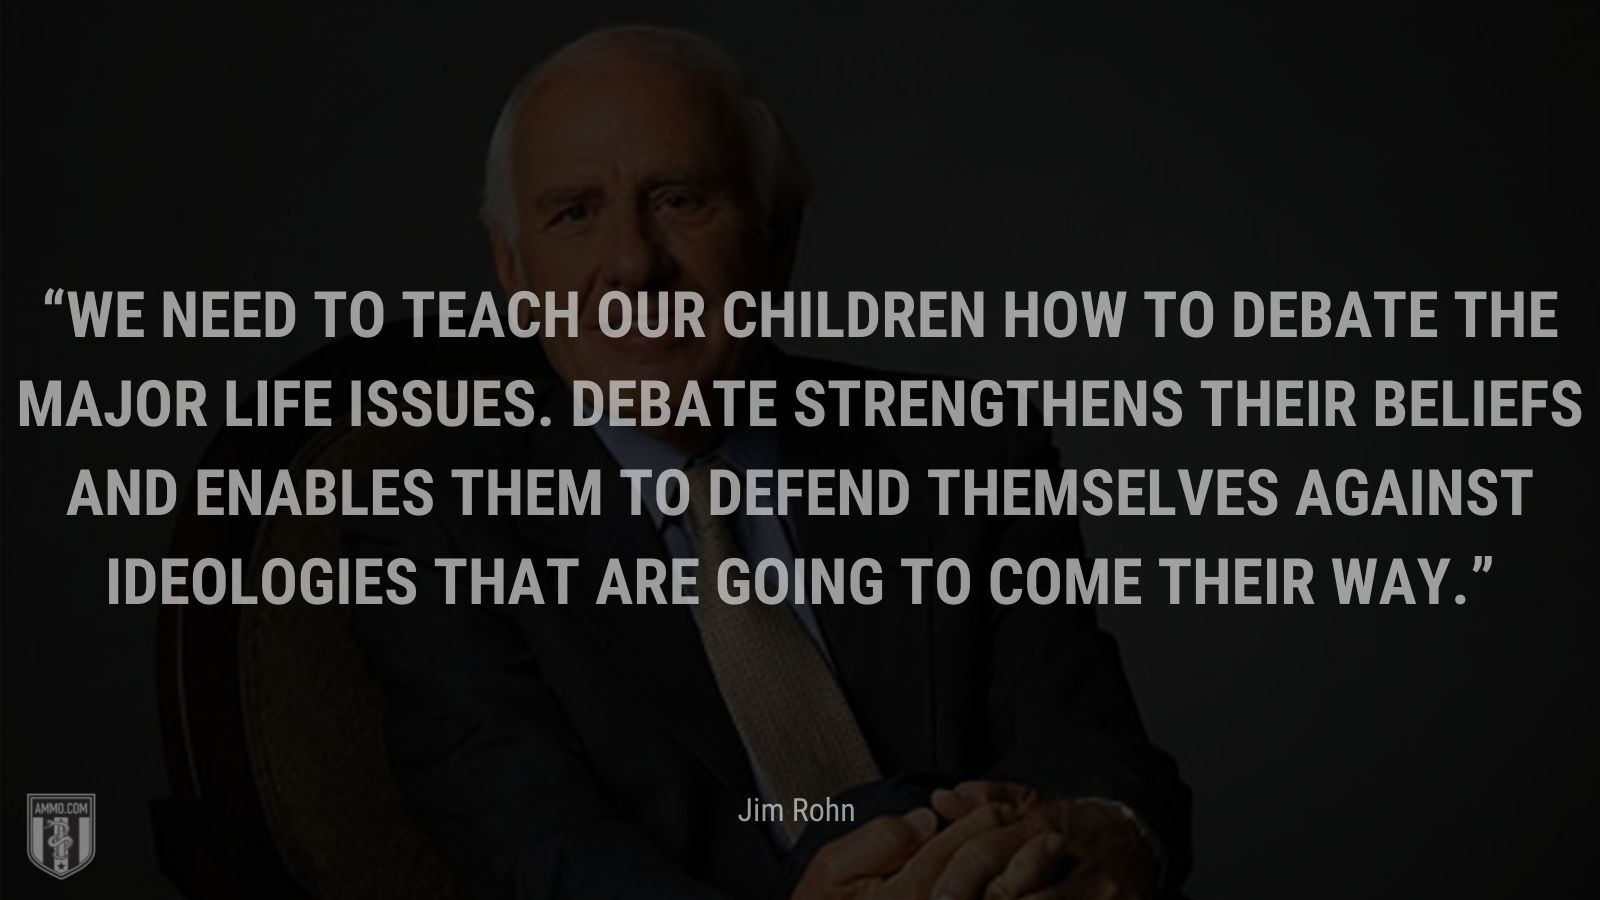 “We need to teach our children how to debate the major life issues.  Debate strengthens their beliefs and enables them to defend themselves against ideologies that are going to come their way.” - Jim Rohn